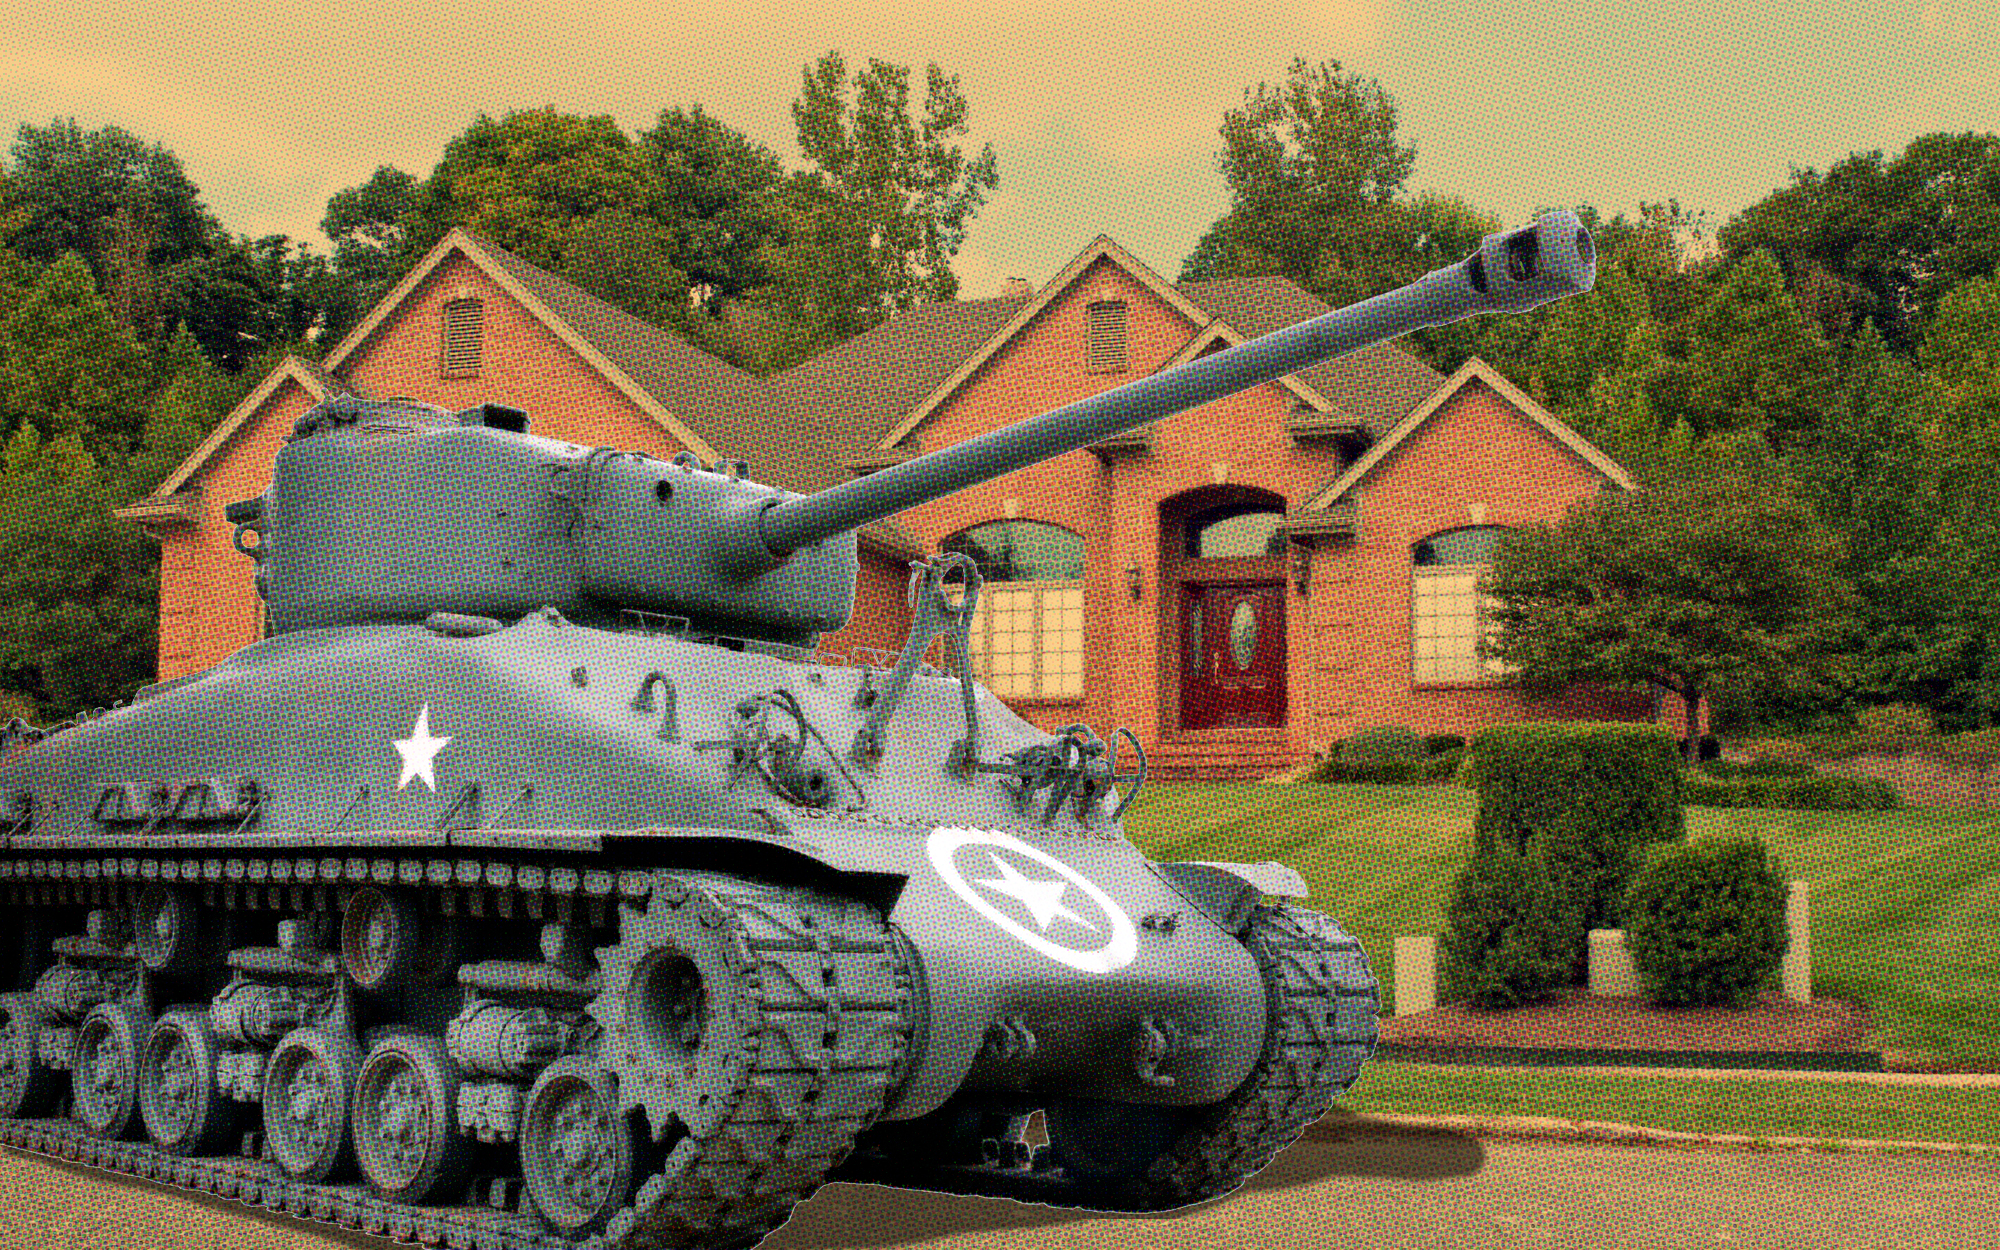 The Complete Story of the River Oaks Tank